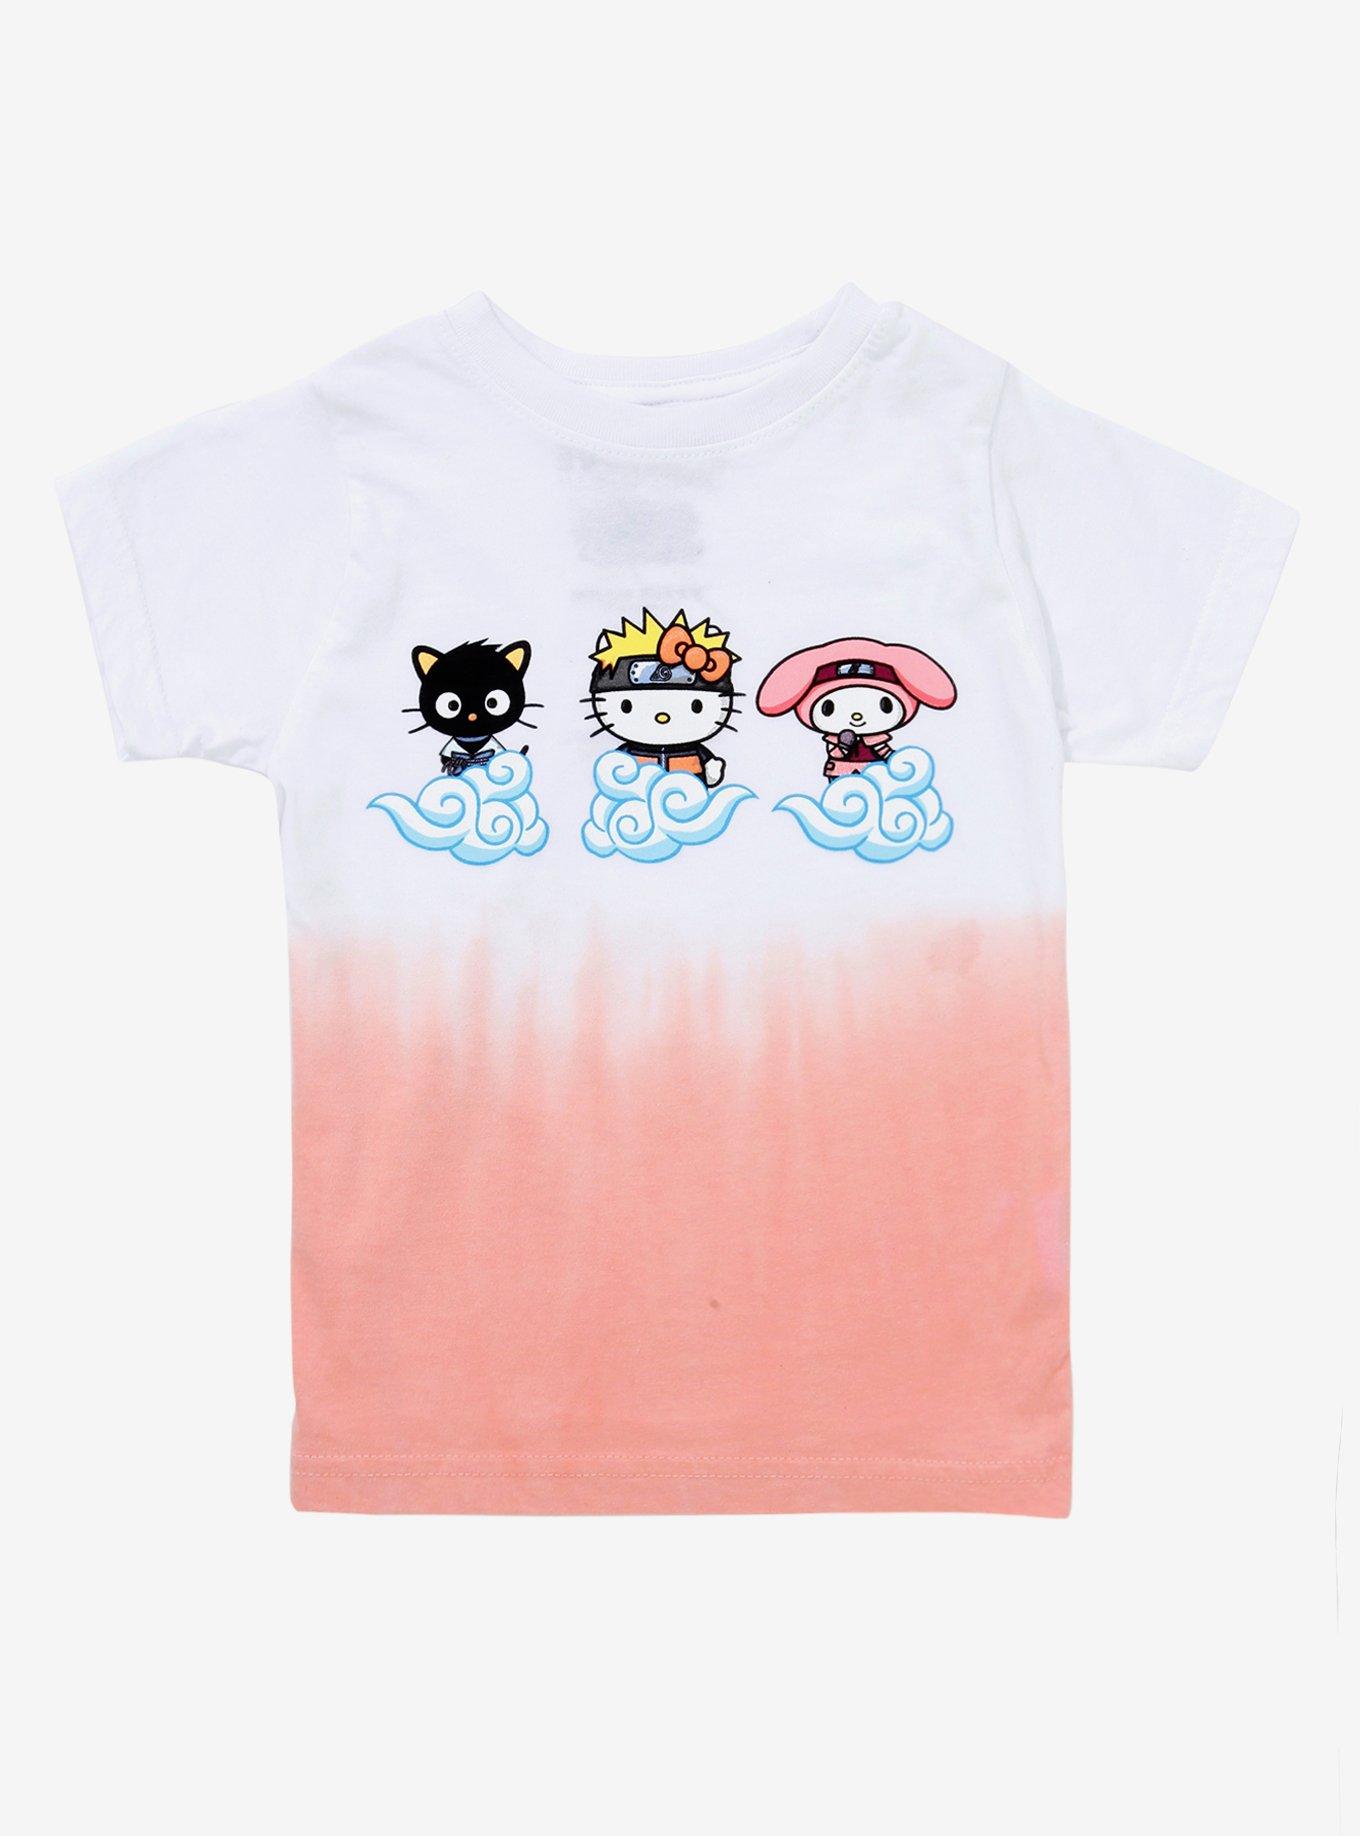 Naruto Shippuden x Hello Kitty and Friends Dip-Dye Toddler T-Shirt - BoxLunch Exclusive, LIGHT ORANGE, hi-res